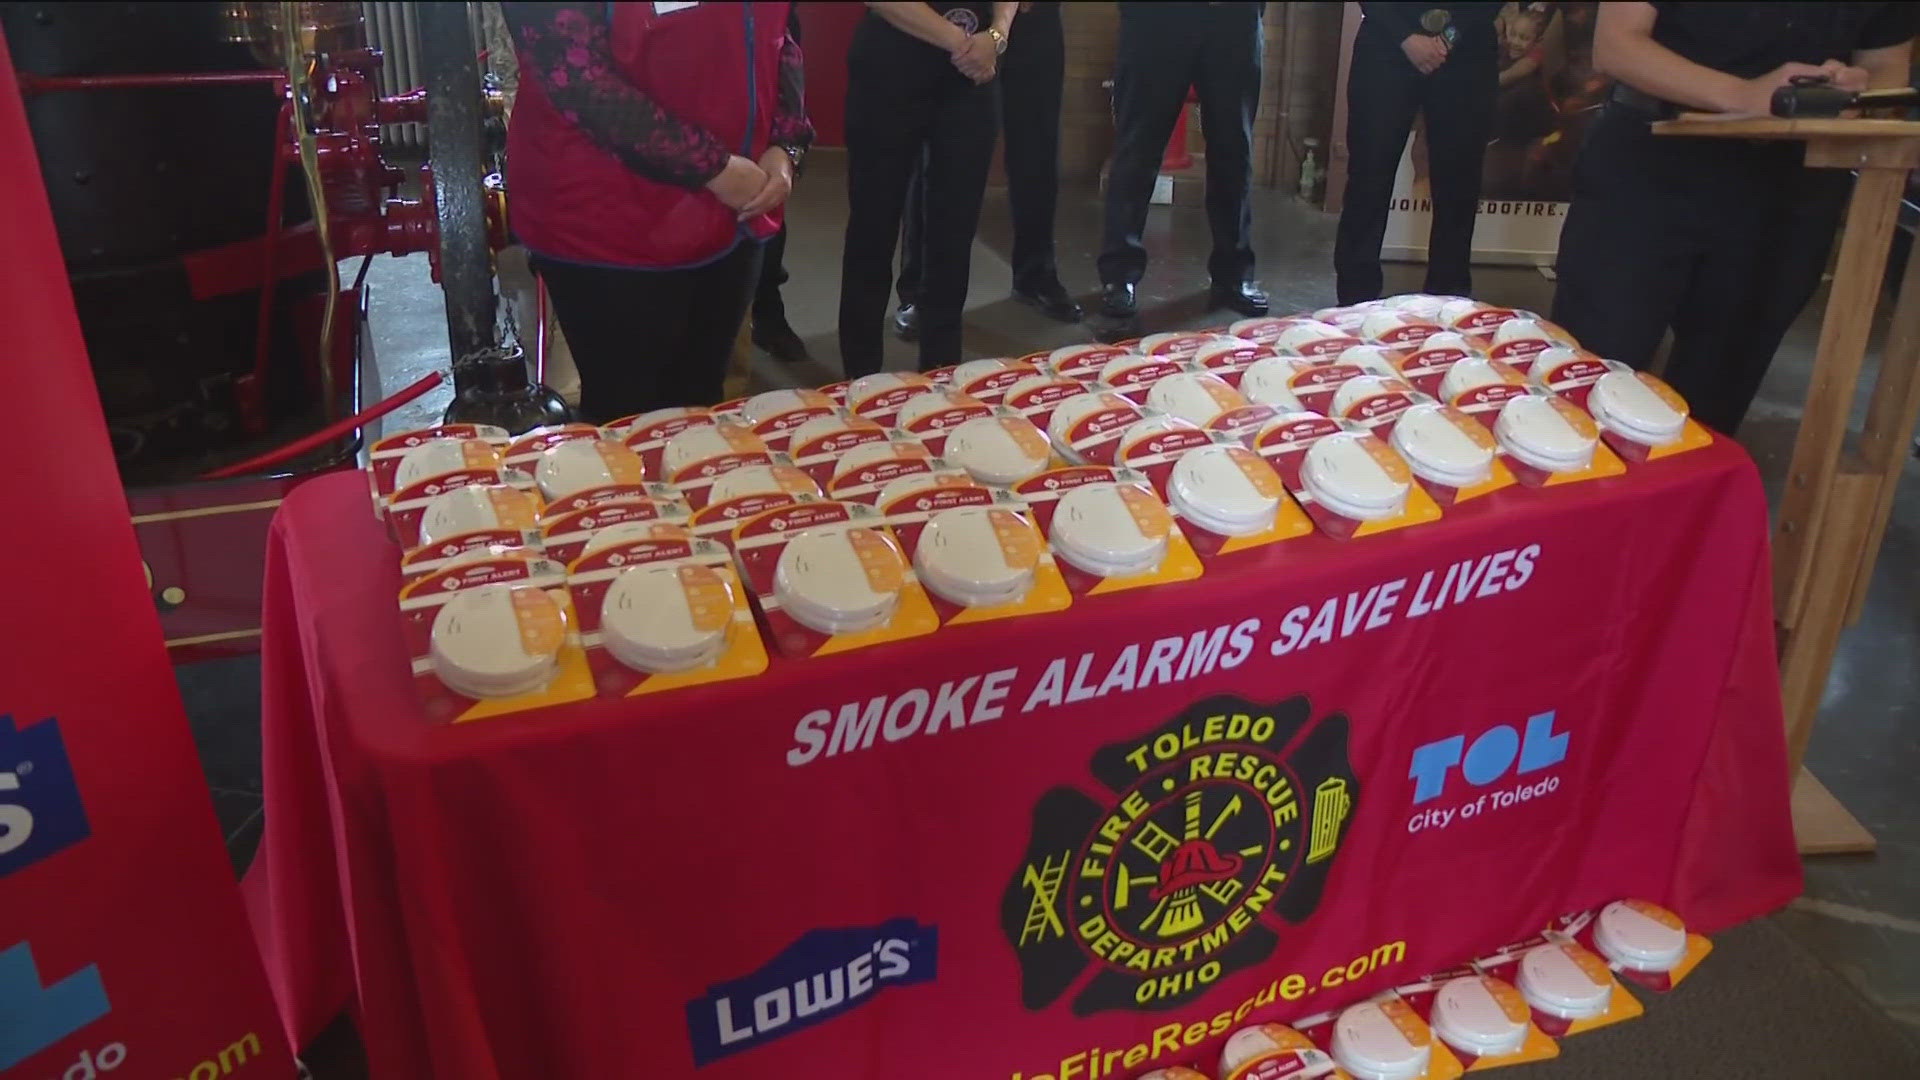 Contact your local fire department or the American Red Cross to get a smoke alarm for your home.